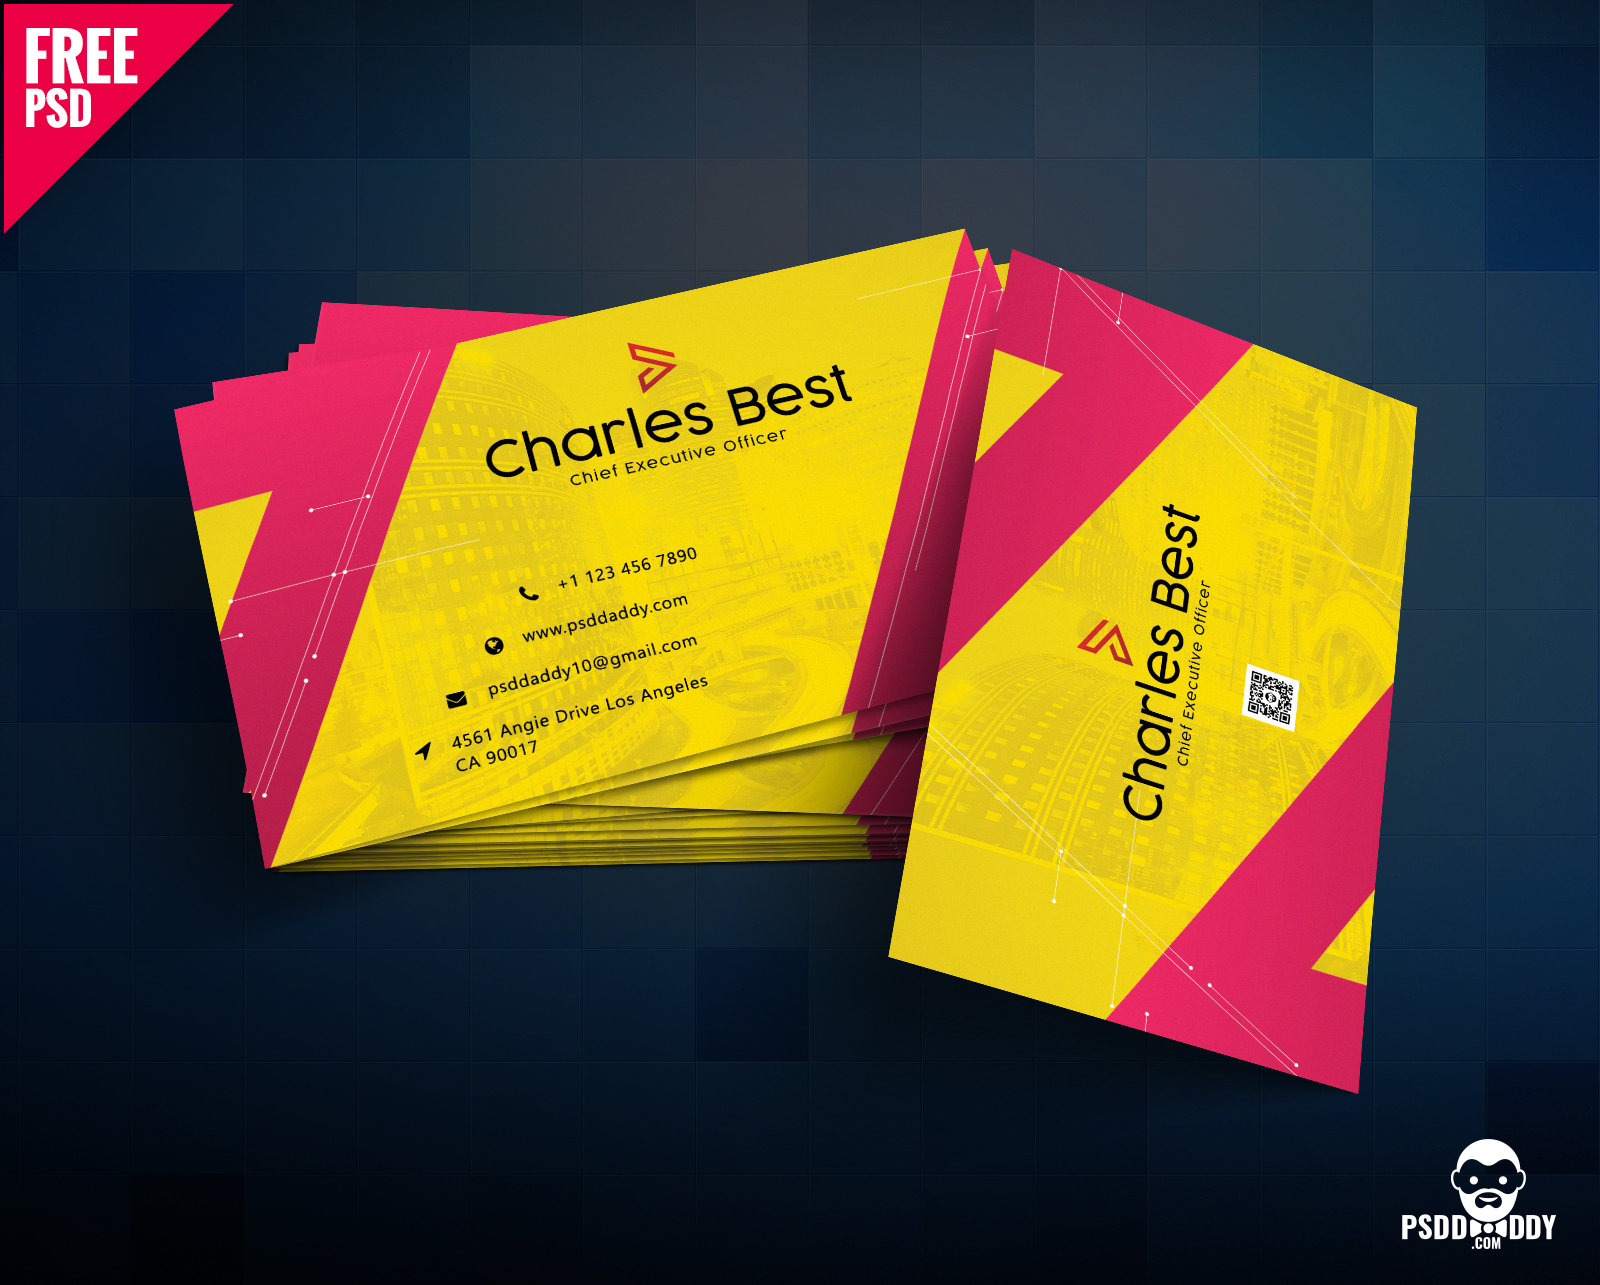 Download] Creative Business Card Free Psd | Psddaddy Inside Name Card Template Photoshop